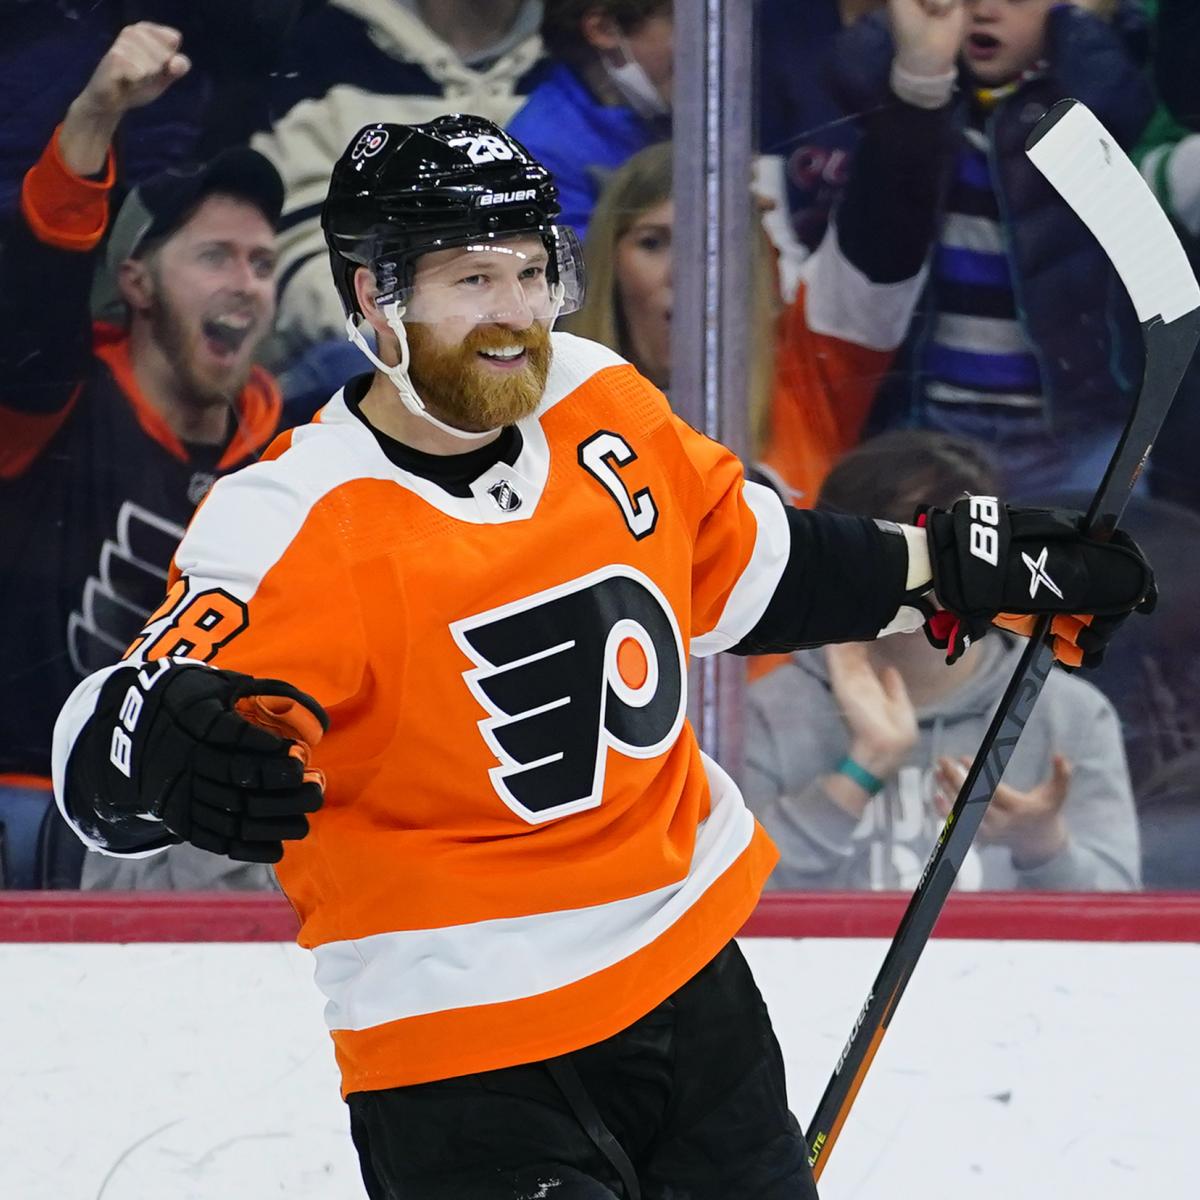 Giroux proves good fit with Panthers, could be key to winning